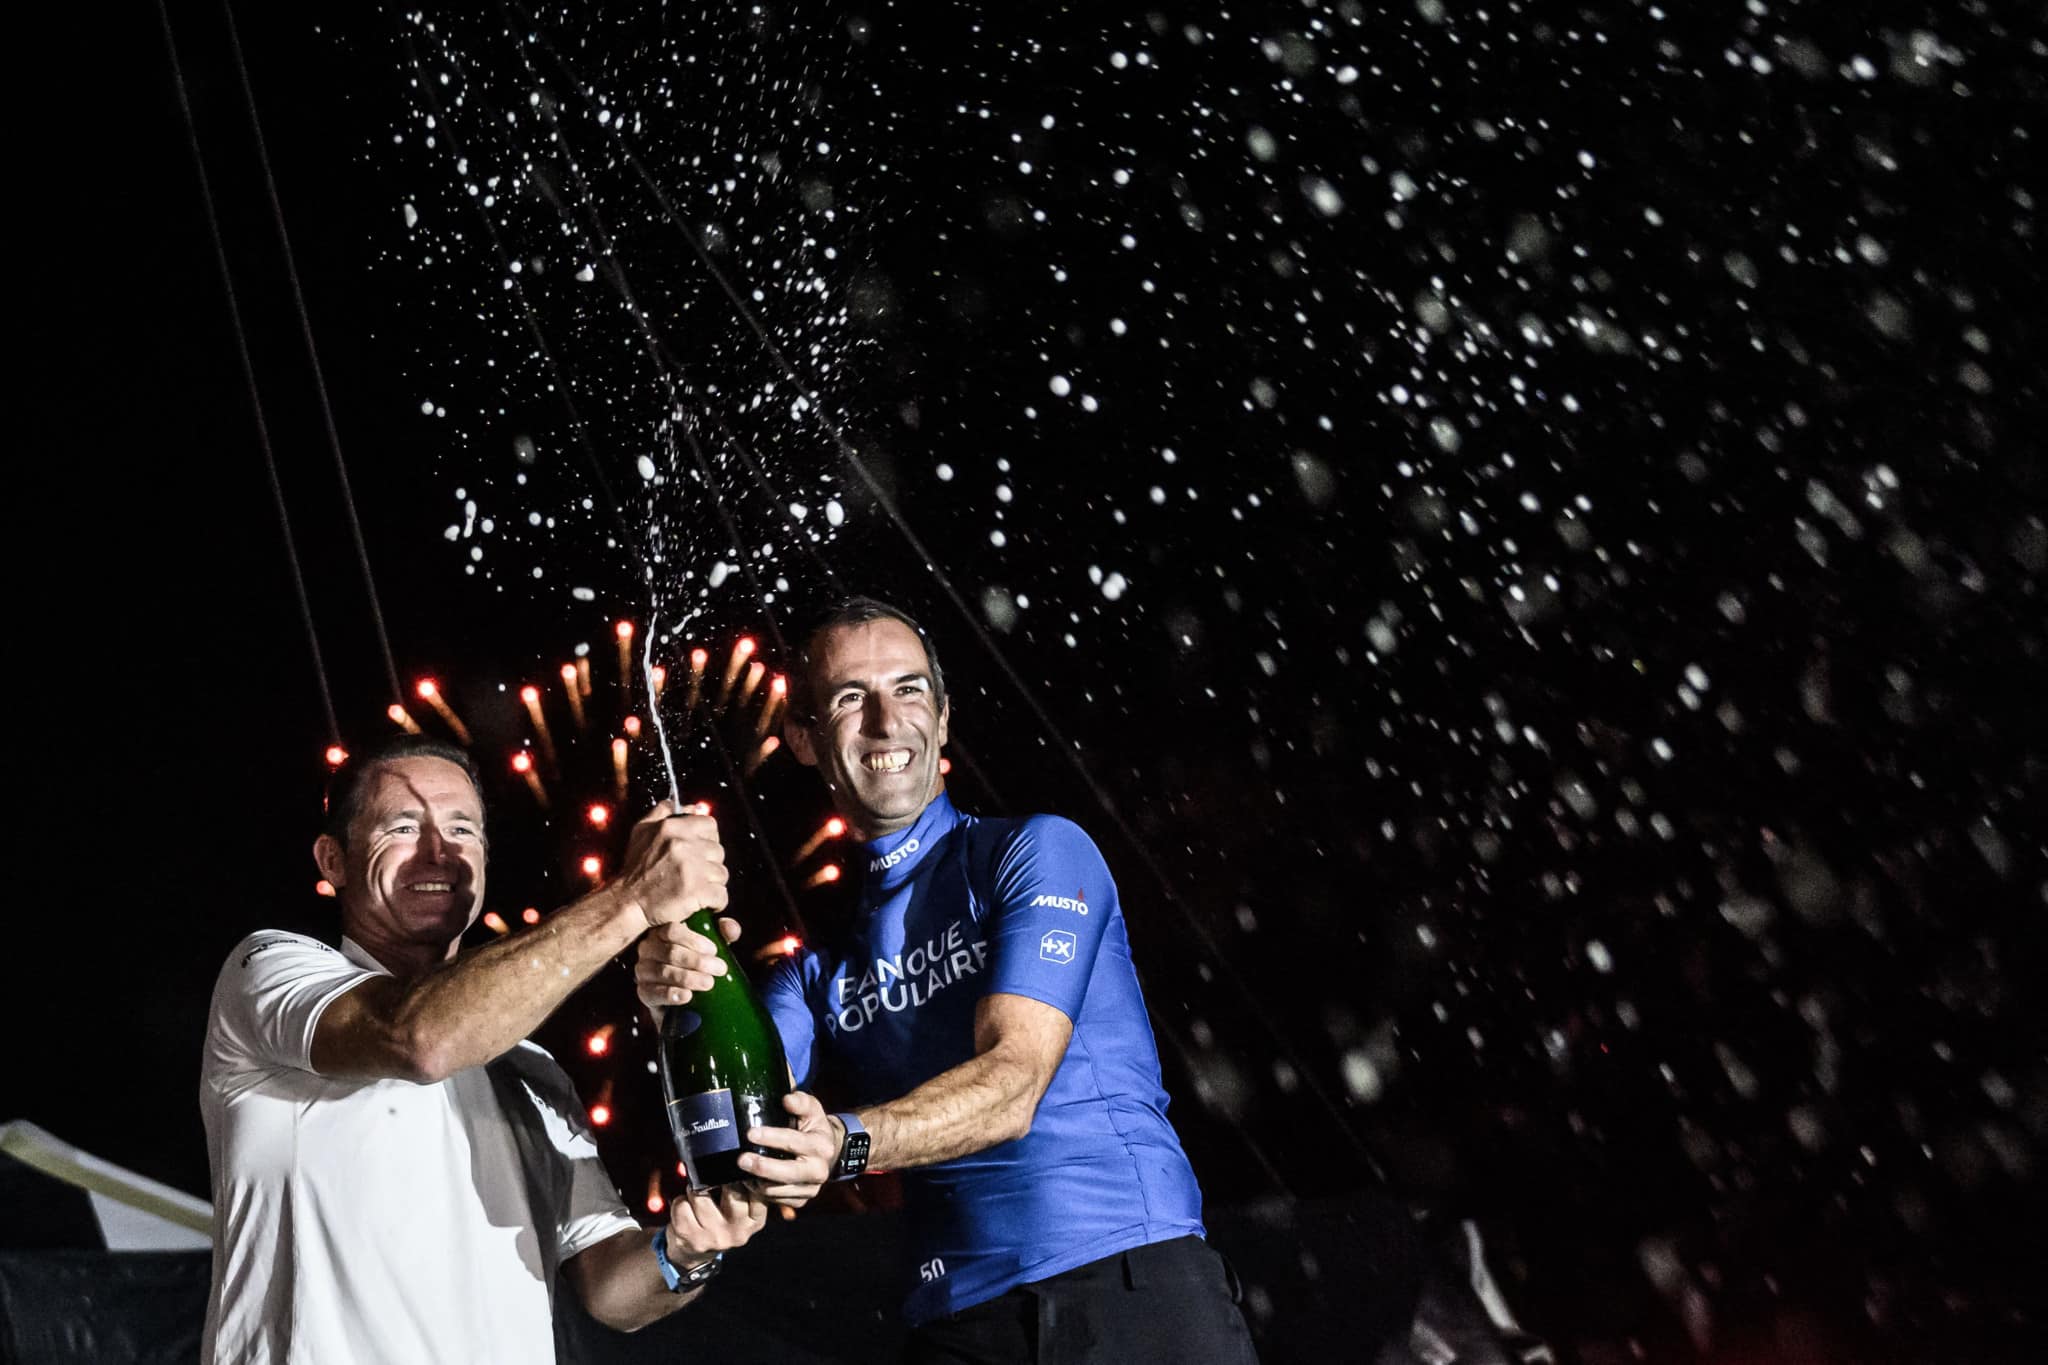 TOPSHOT - French skipper of the Banque Populaire Ultim multihull Armel Le Cleac'h (R) sprays Champagne with his co-skipper Sebastien Josse as they celebrate after winning the Transat Jacques Vabre pair sailing race, from Le Havre to the French overseas island of La Martinique, in Fort-de-France in the west indies island of Martinique on November 12, 2023. (Photo by LOIC VENANCE / AFP)